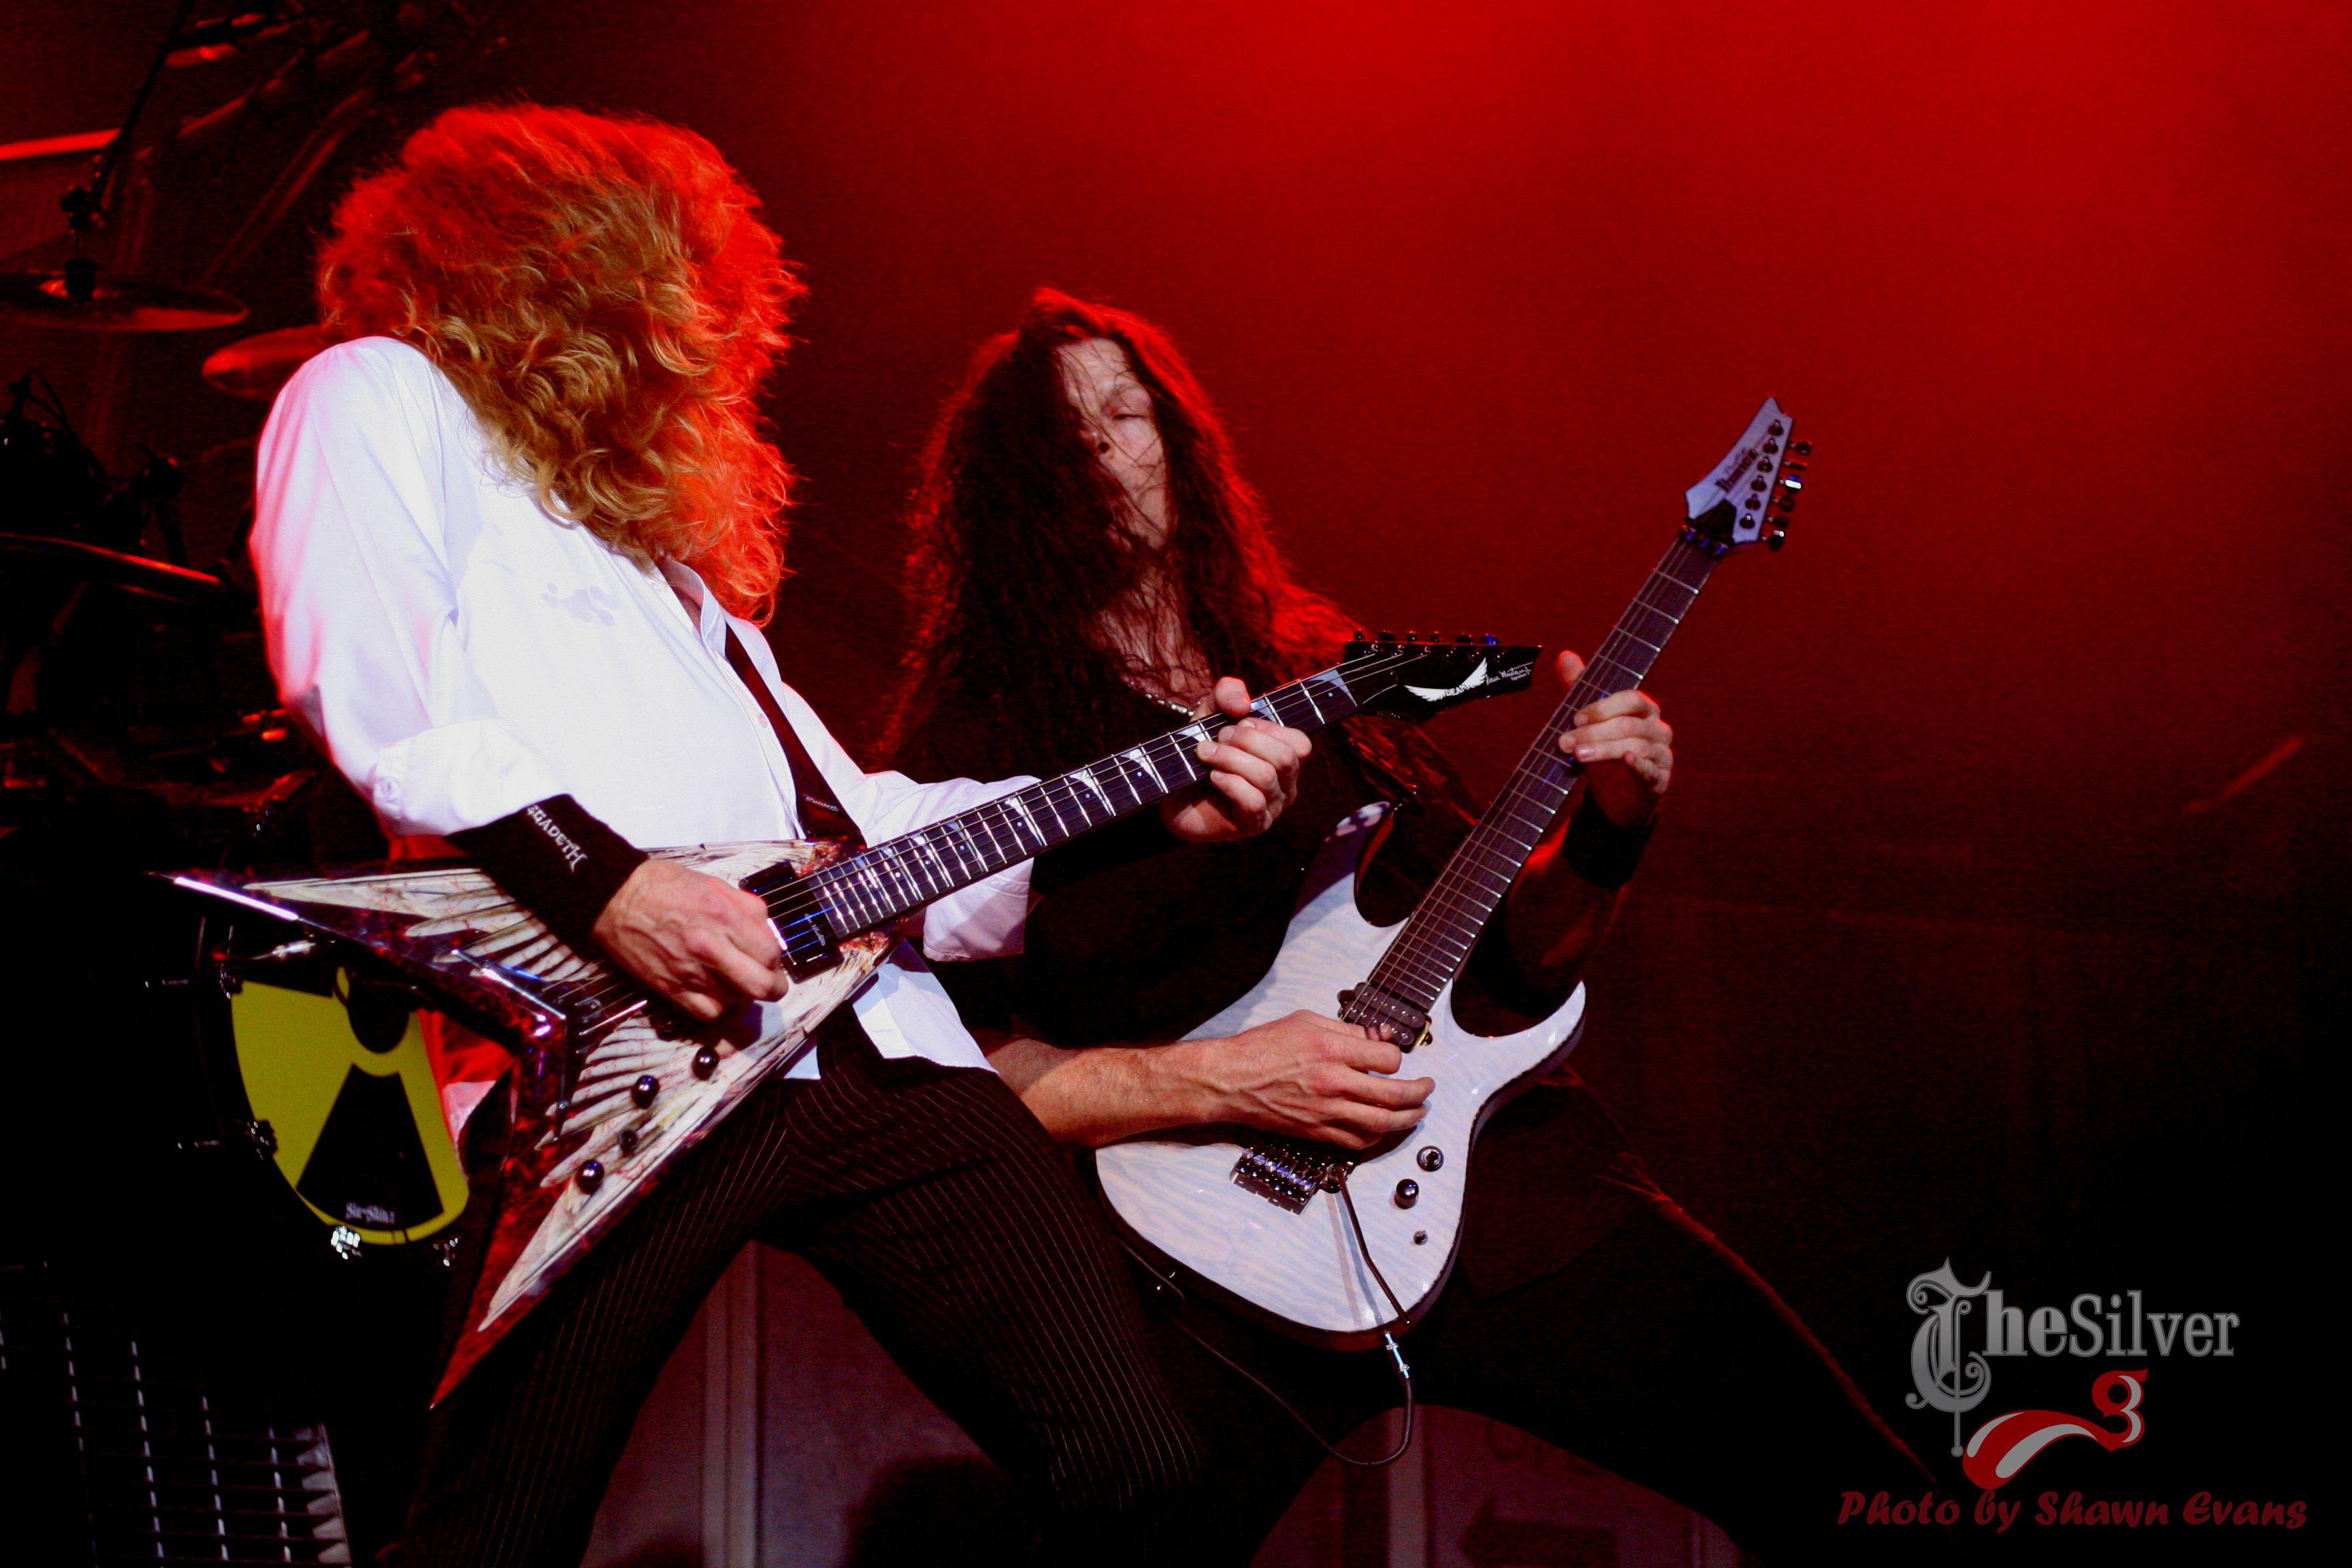 Megadeth HD Wallpaper and Background Image